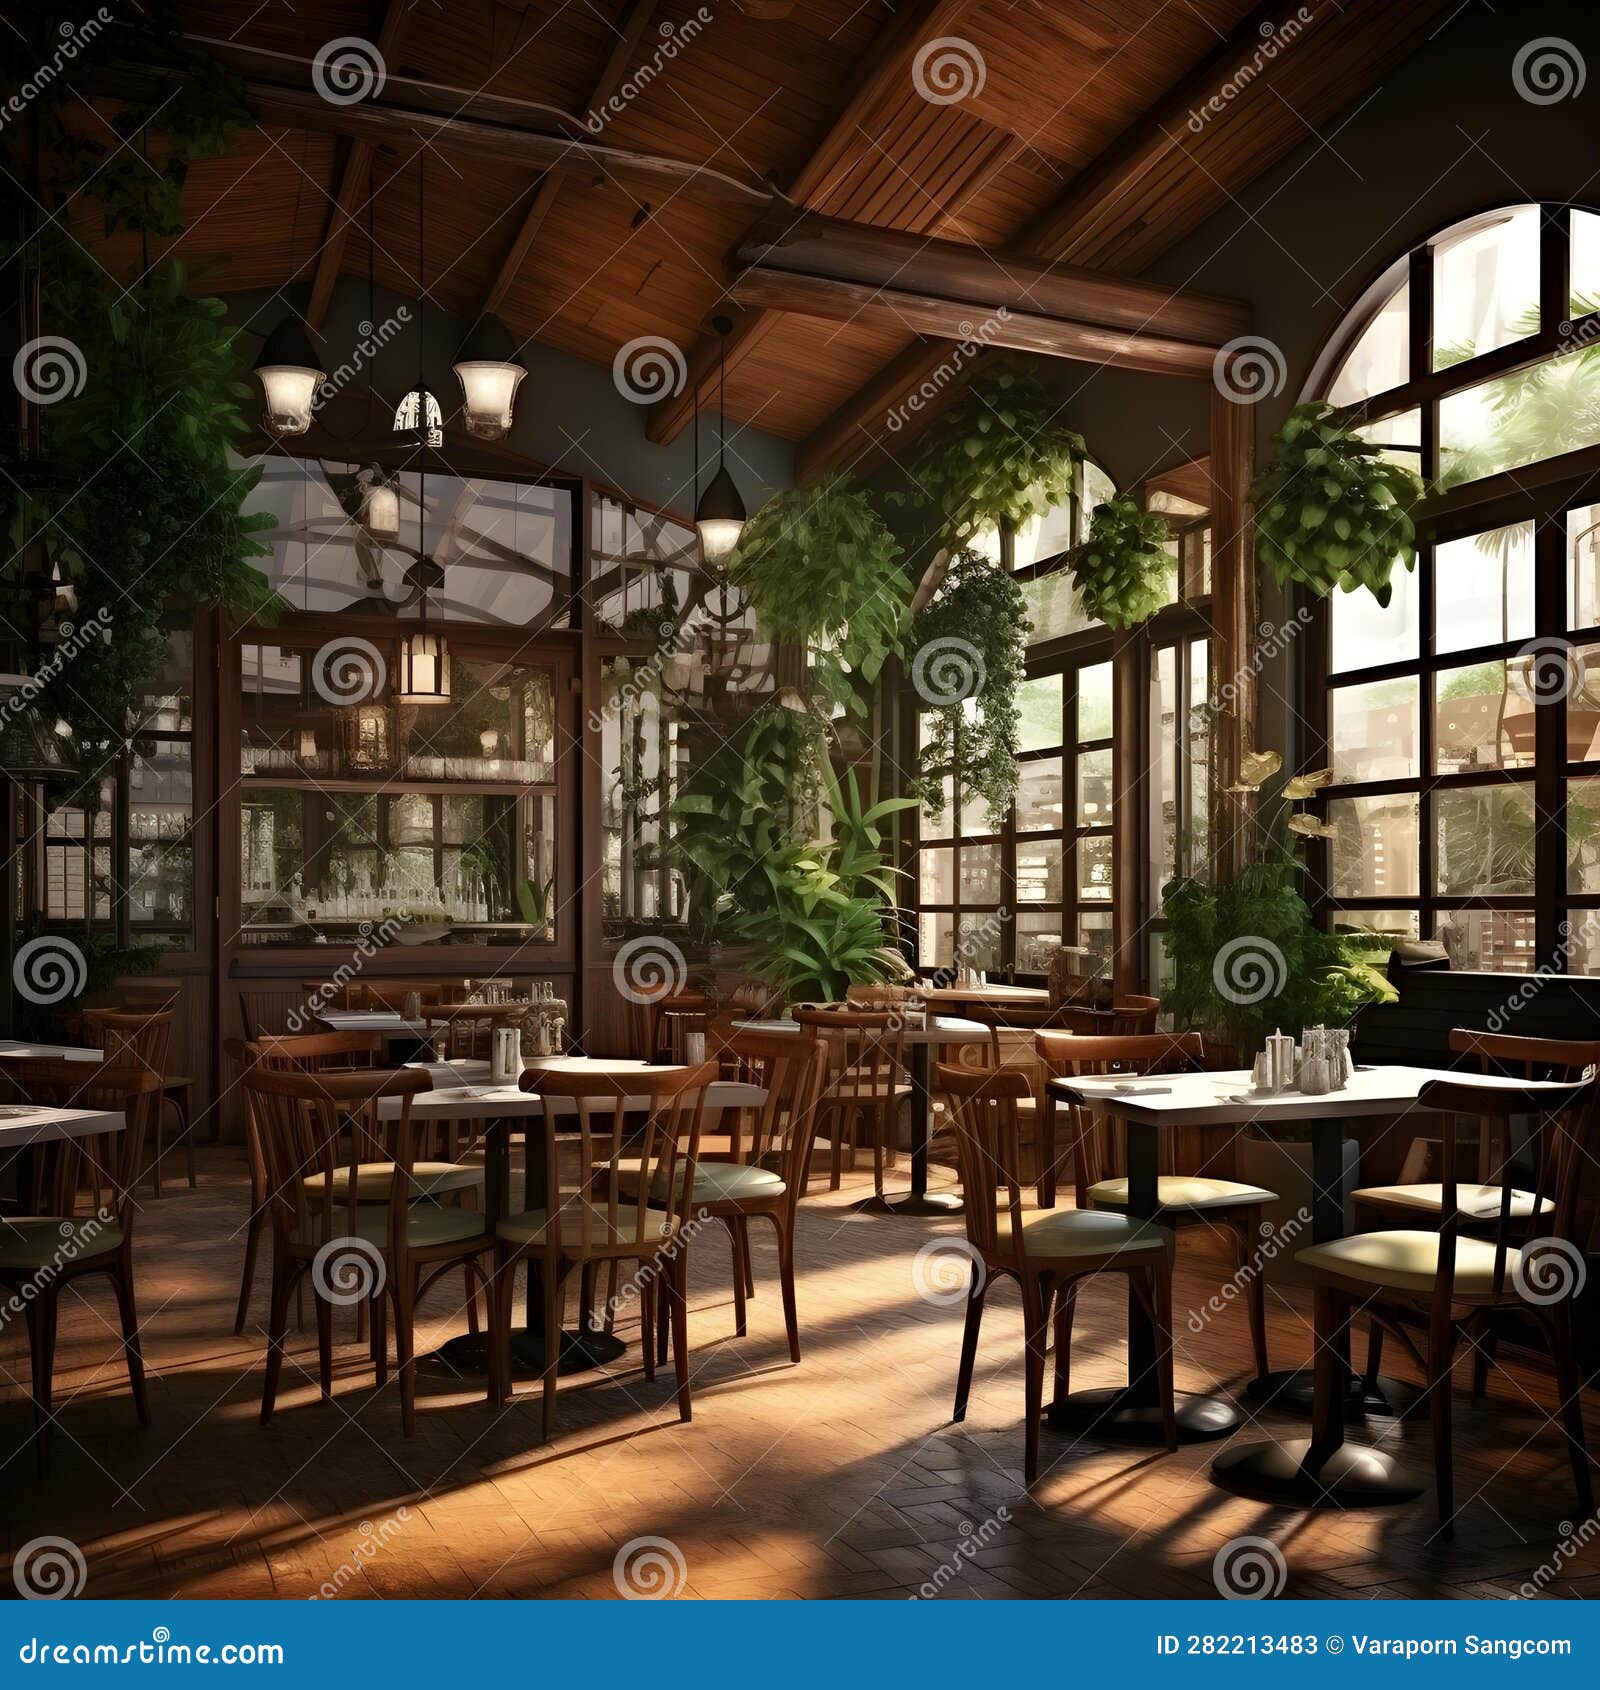 savoring delights: exploring the culinary journey at restaurant with fresh nature. ai generated